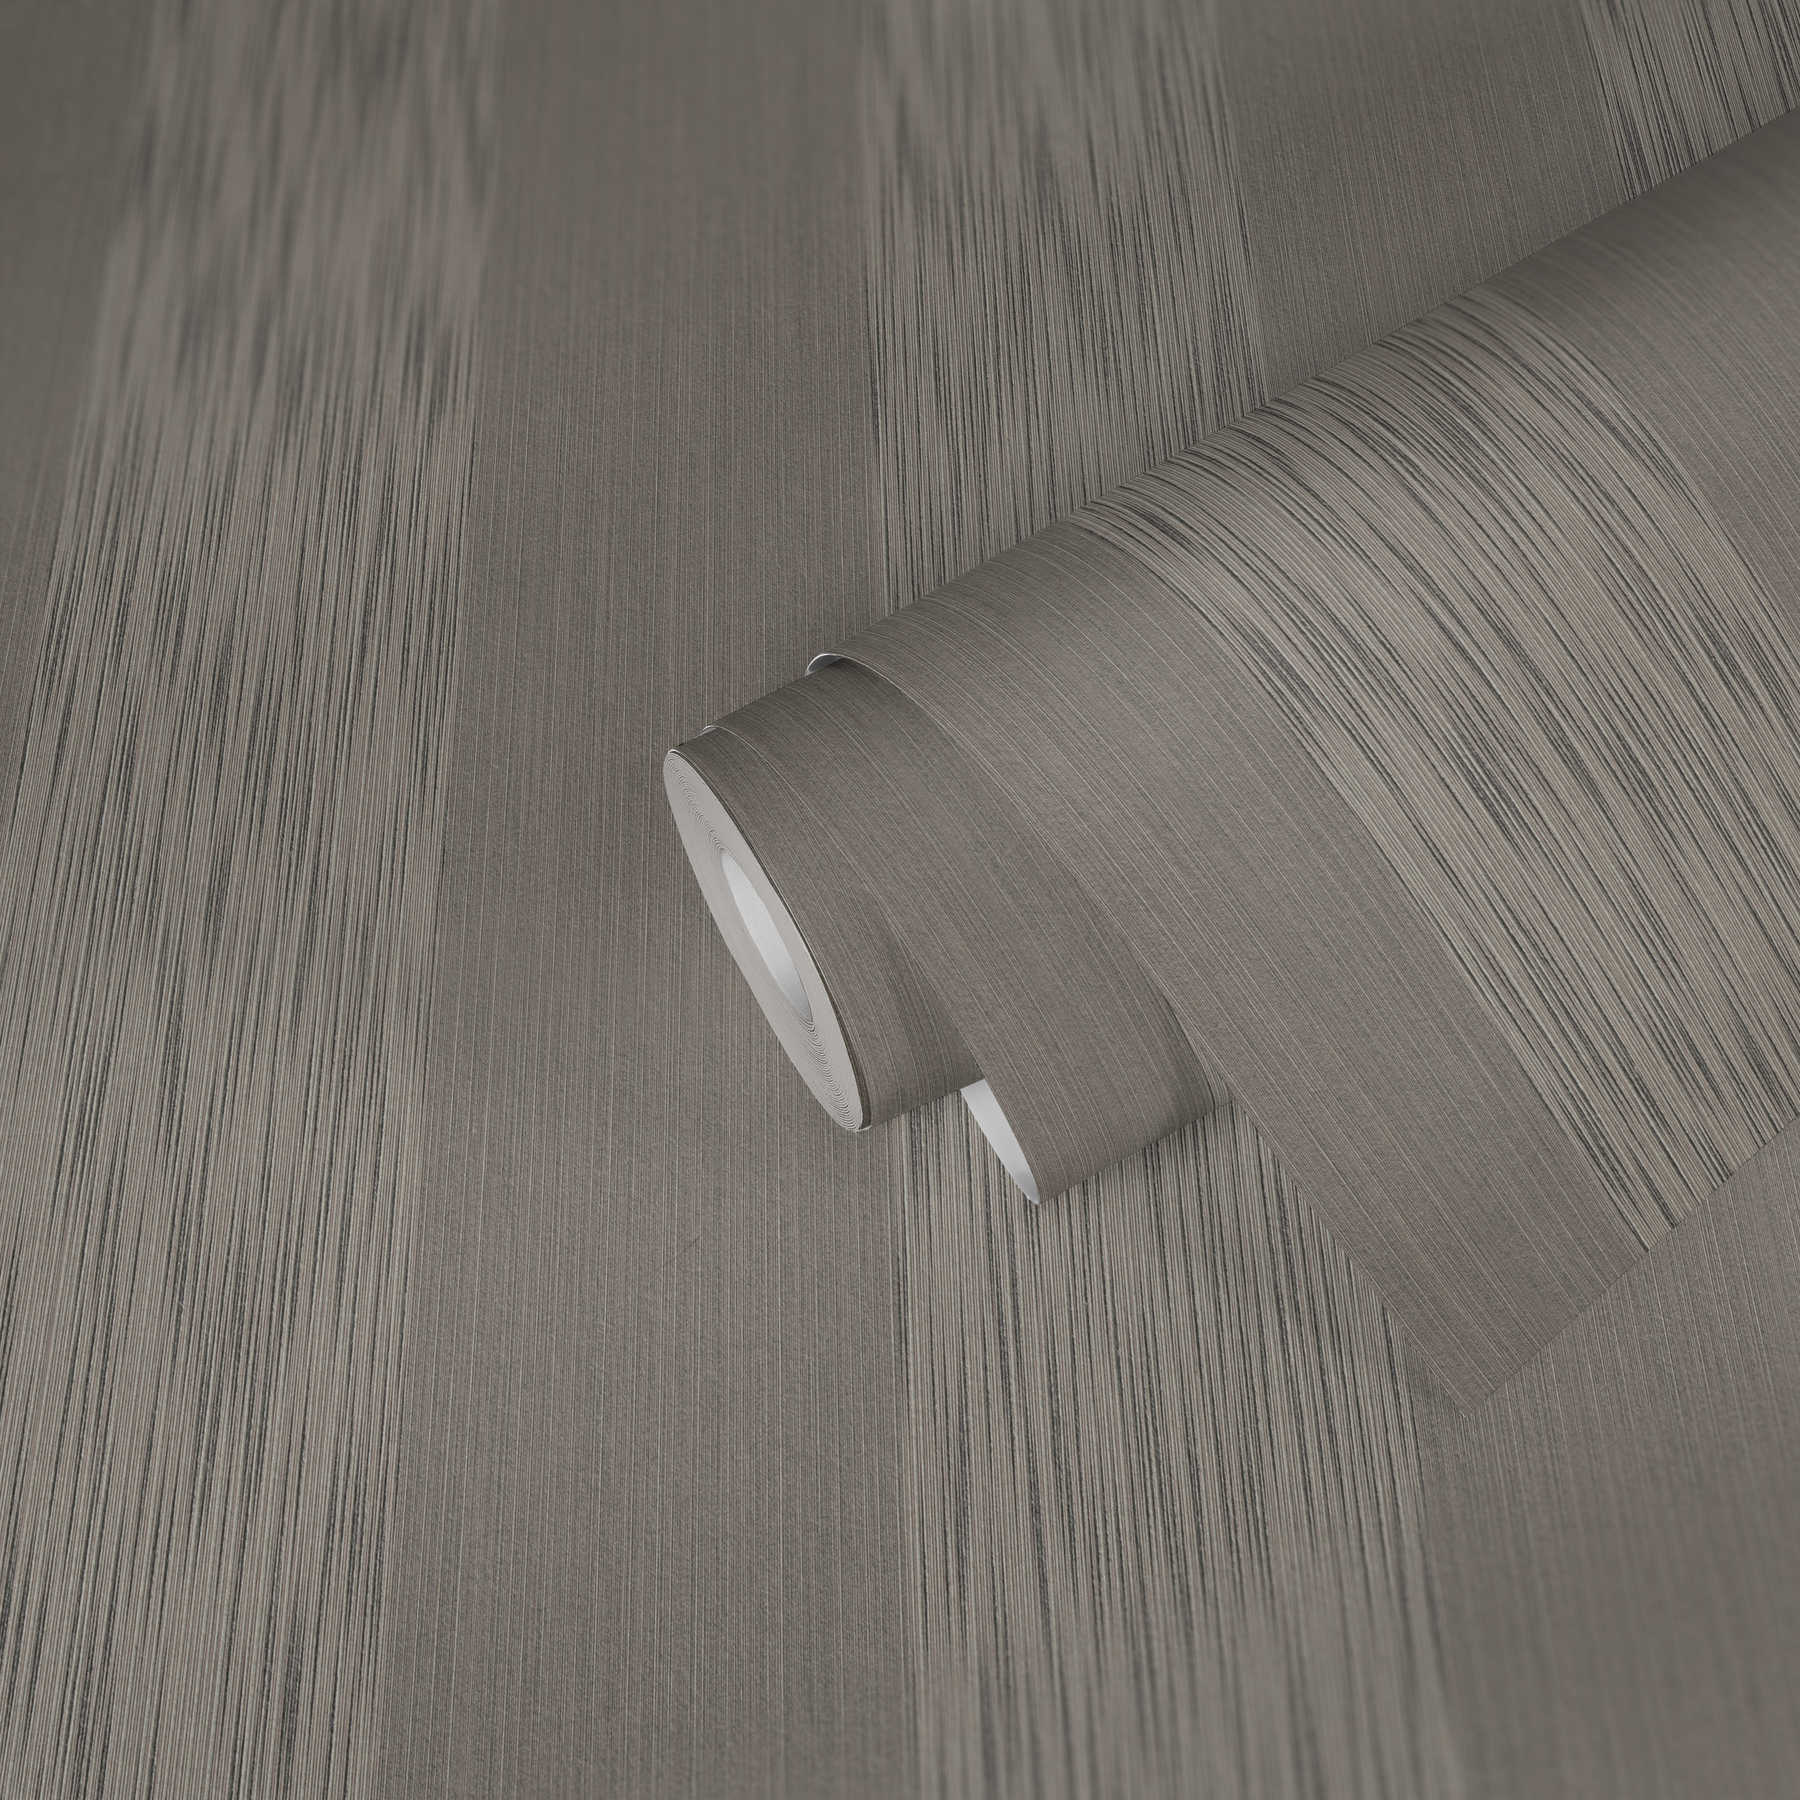             Melange stripes wallpaper with texture effect - grey
        